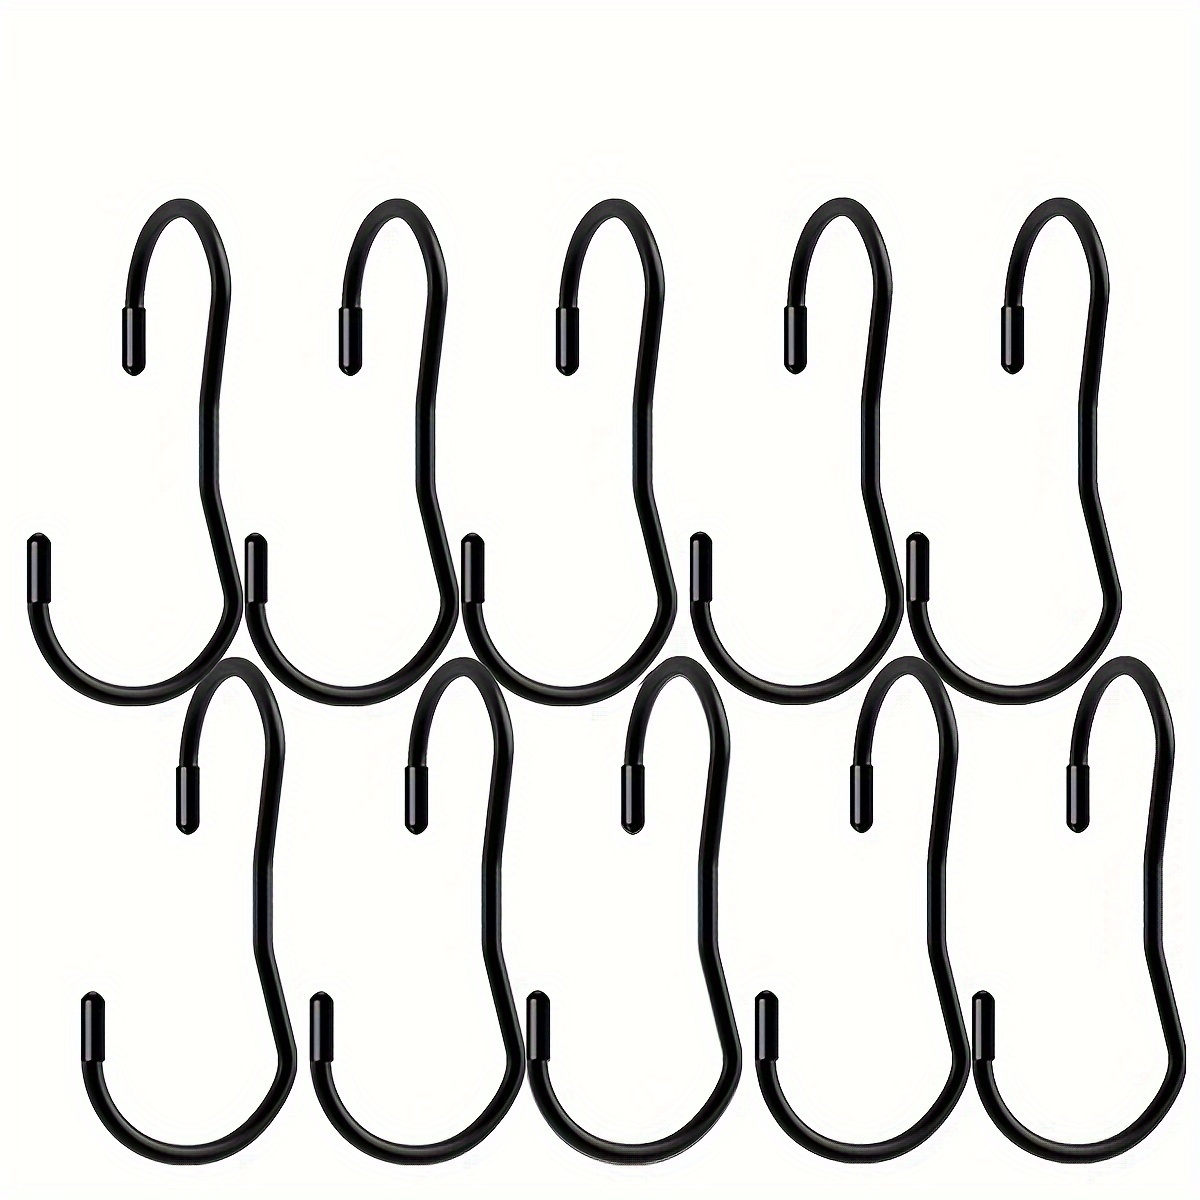 5 inch 12 Pack S Hook, Large Vinyl Coated S Hooks with Rubber Stopper Non  Slip Heavy Duty S Hook, Steel Metal Black Rubber Coated Closet S Hooks for